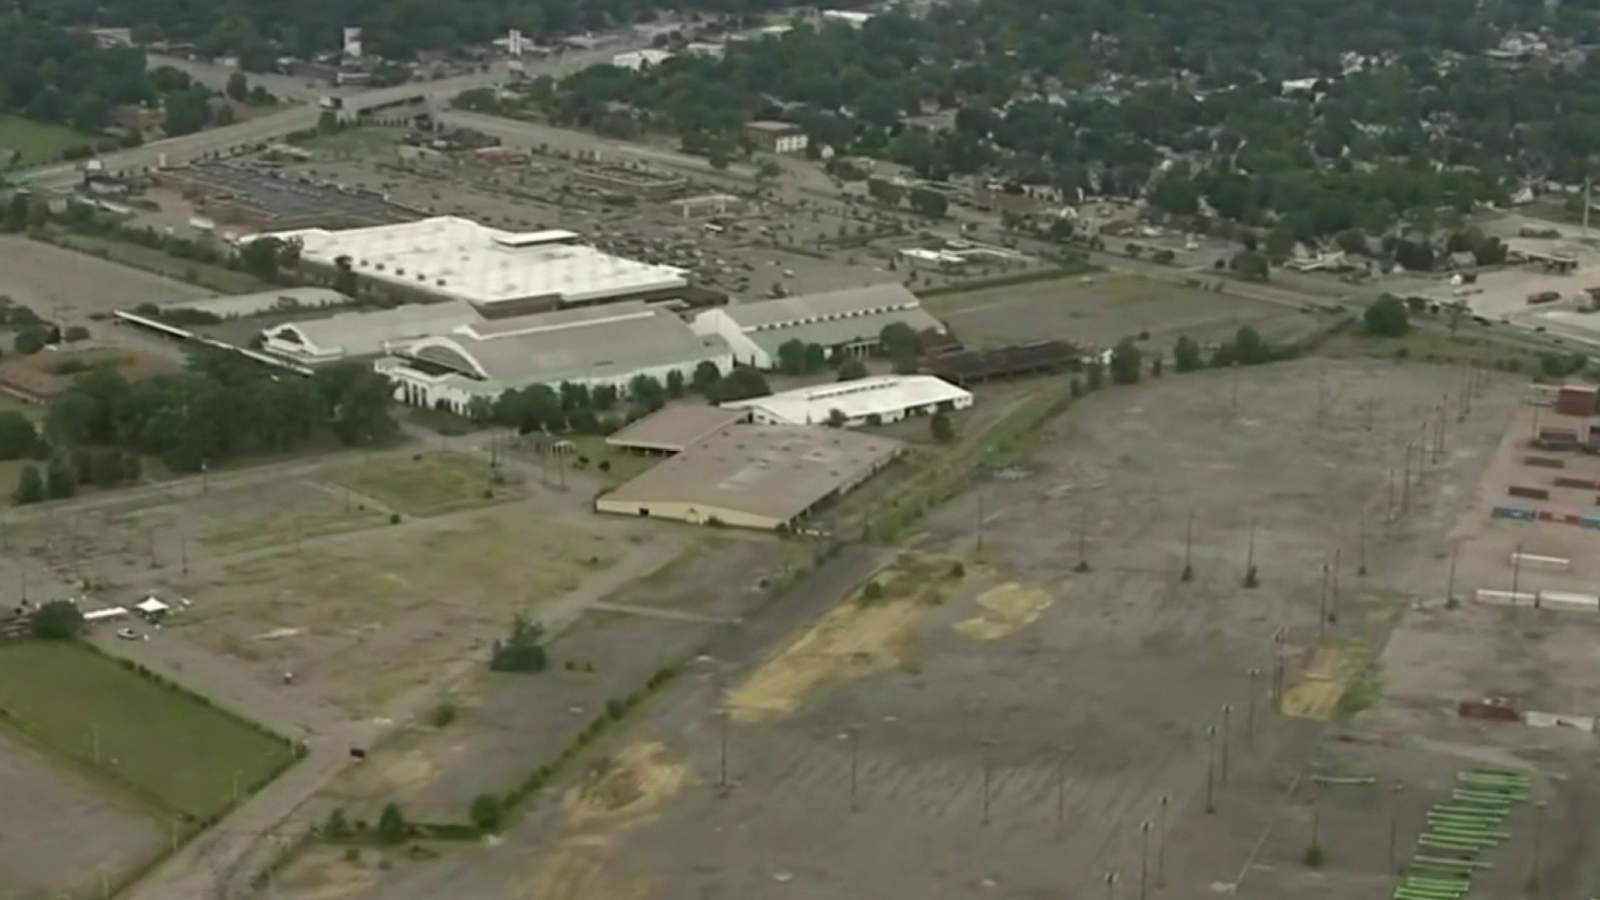 Judge temporarily halts sale of former State Fairgrounds site for redevelopment project